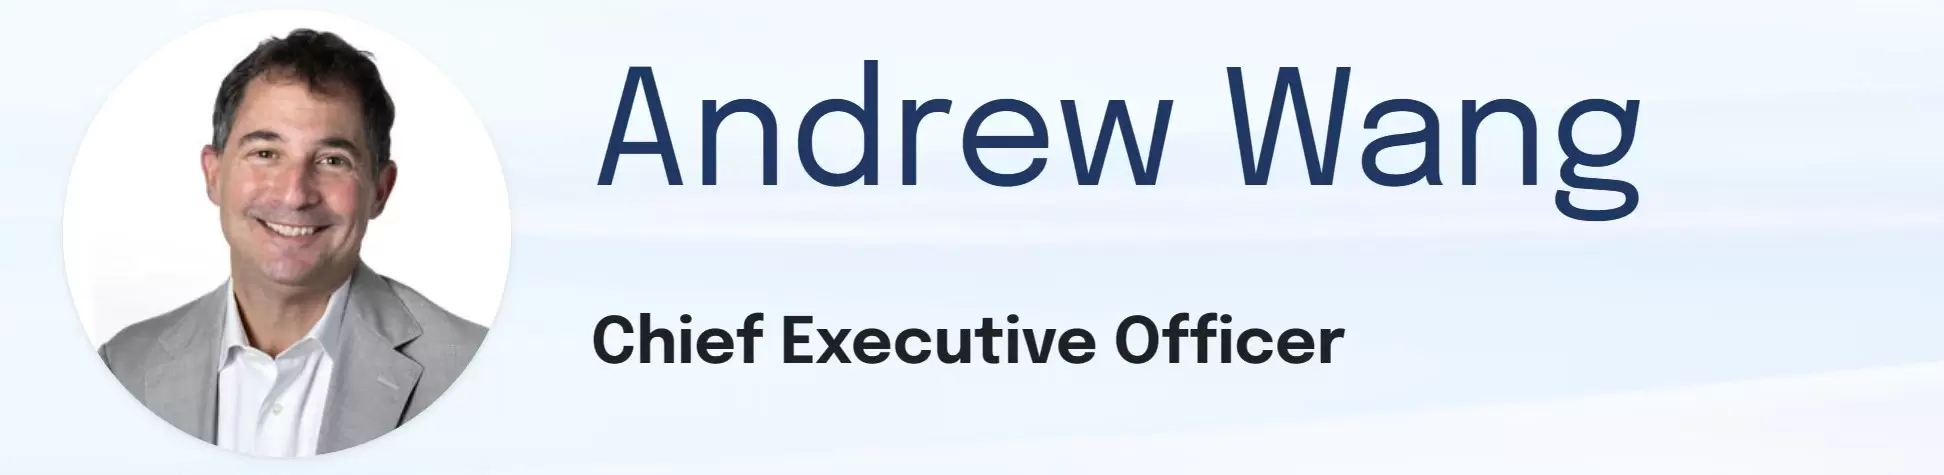 Andrew Wang CEO